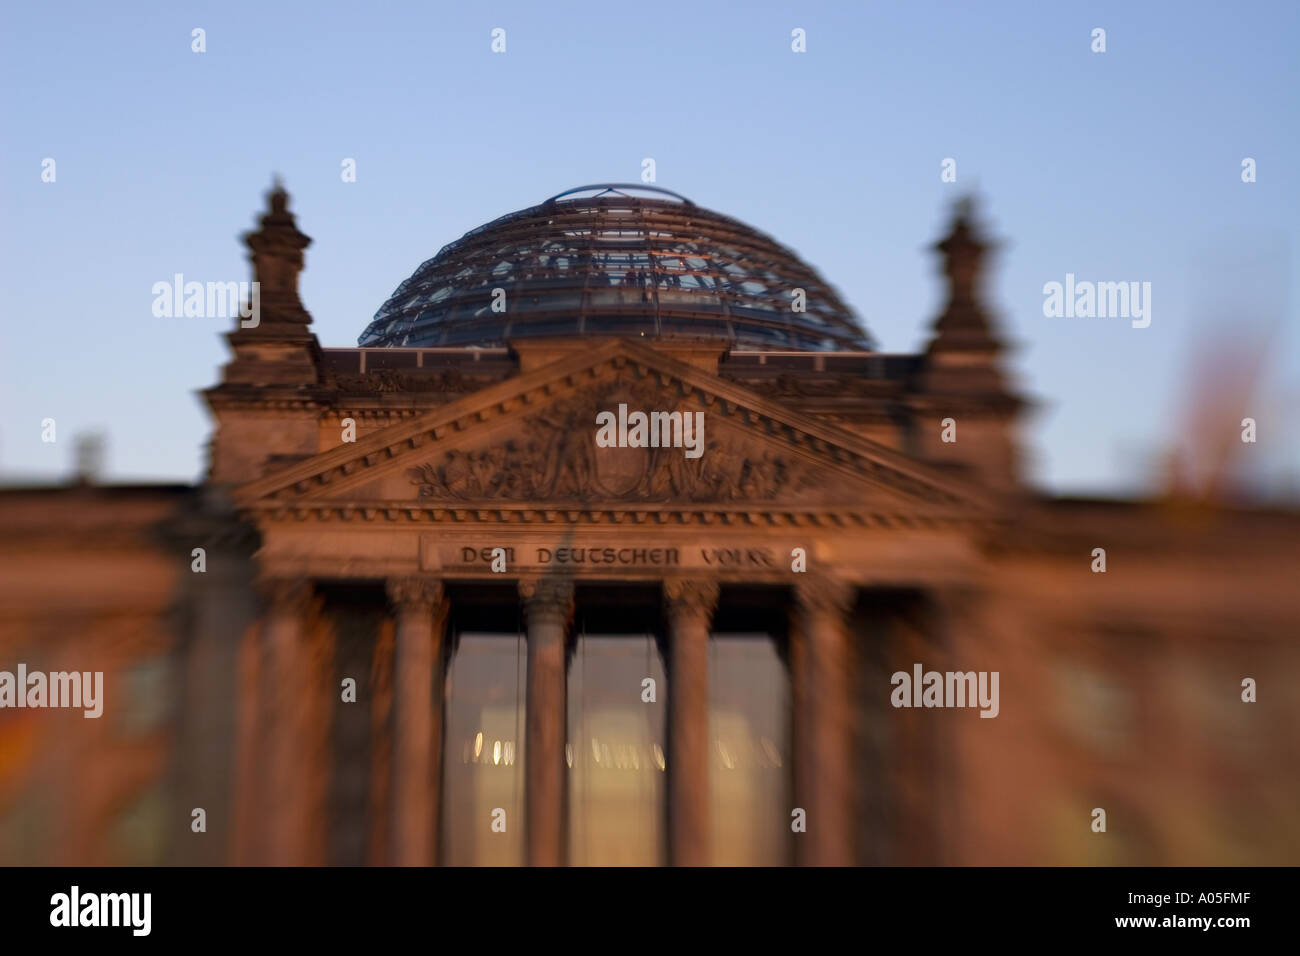 Berlin Reichstag dome by Norman Forster blurred Stock Photo